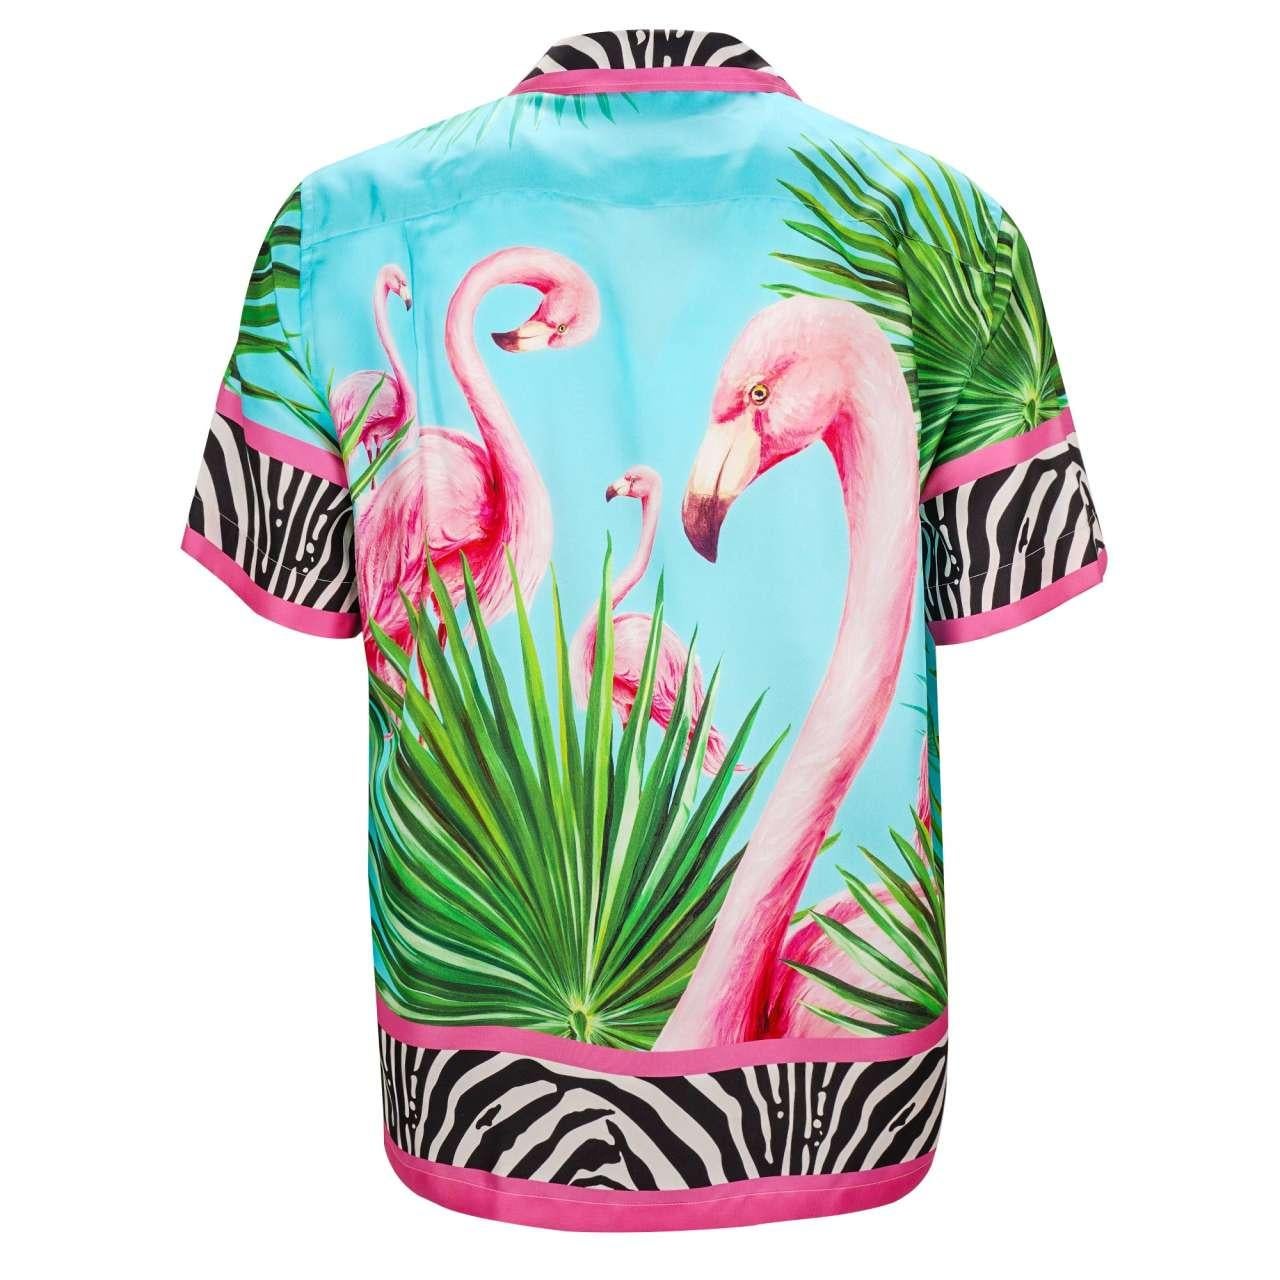 Dolce & Gabbana - DJ Khaled Silk Flamingo Zebra Shirt with Sunglasses and CD 41 In Excellent Condition For Sale In Erkrath, DE